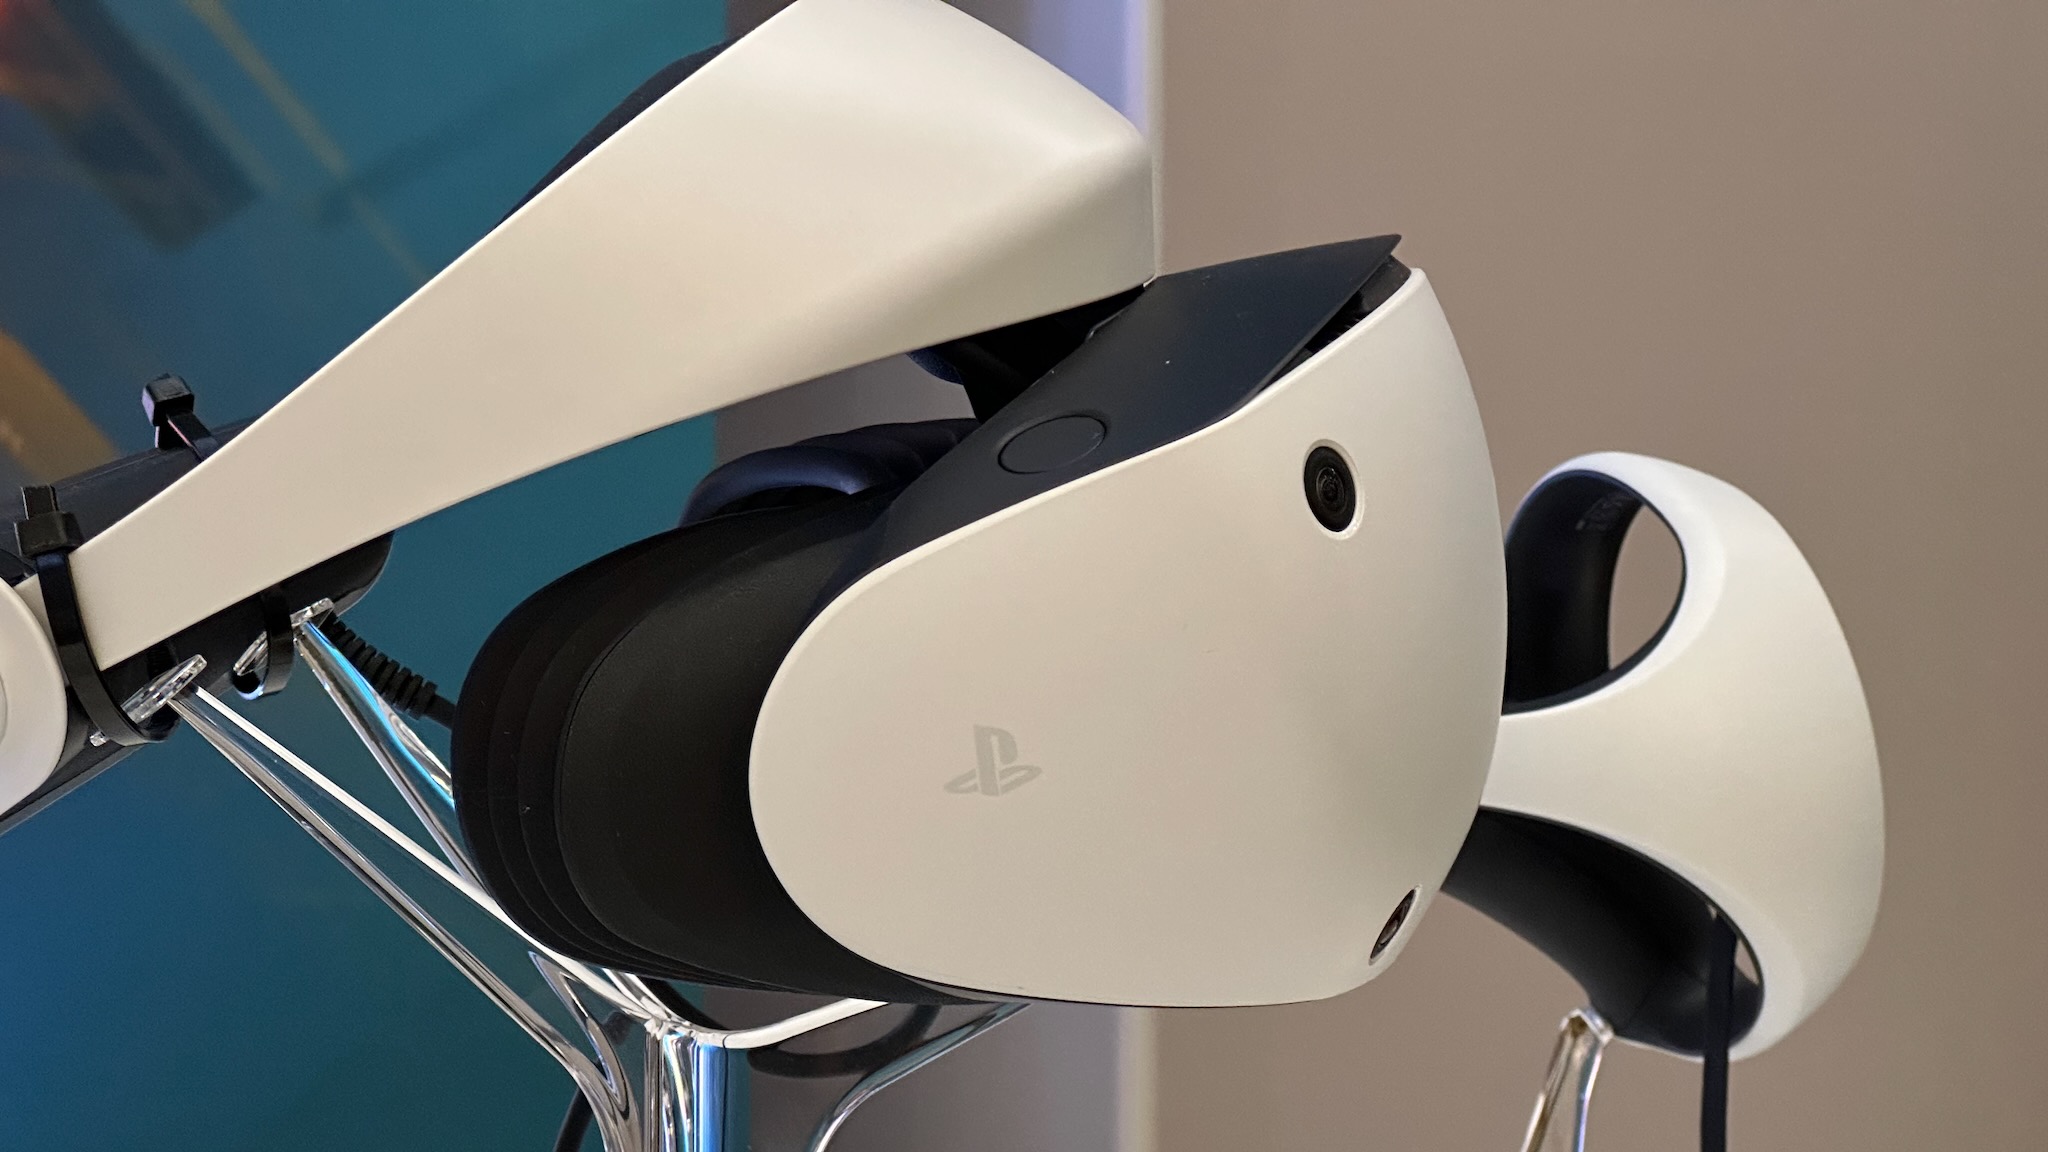 PlayStation VR Is Backward Compatible On PS5, But There's A Catch